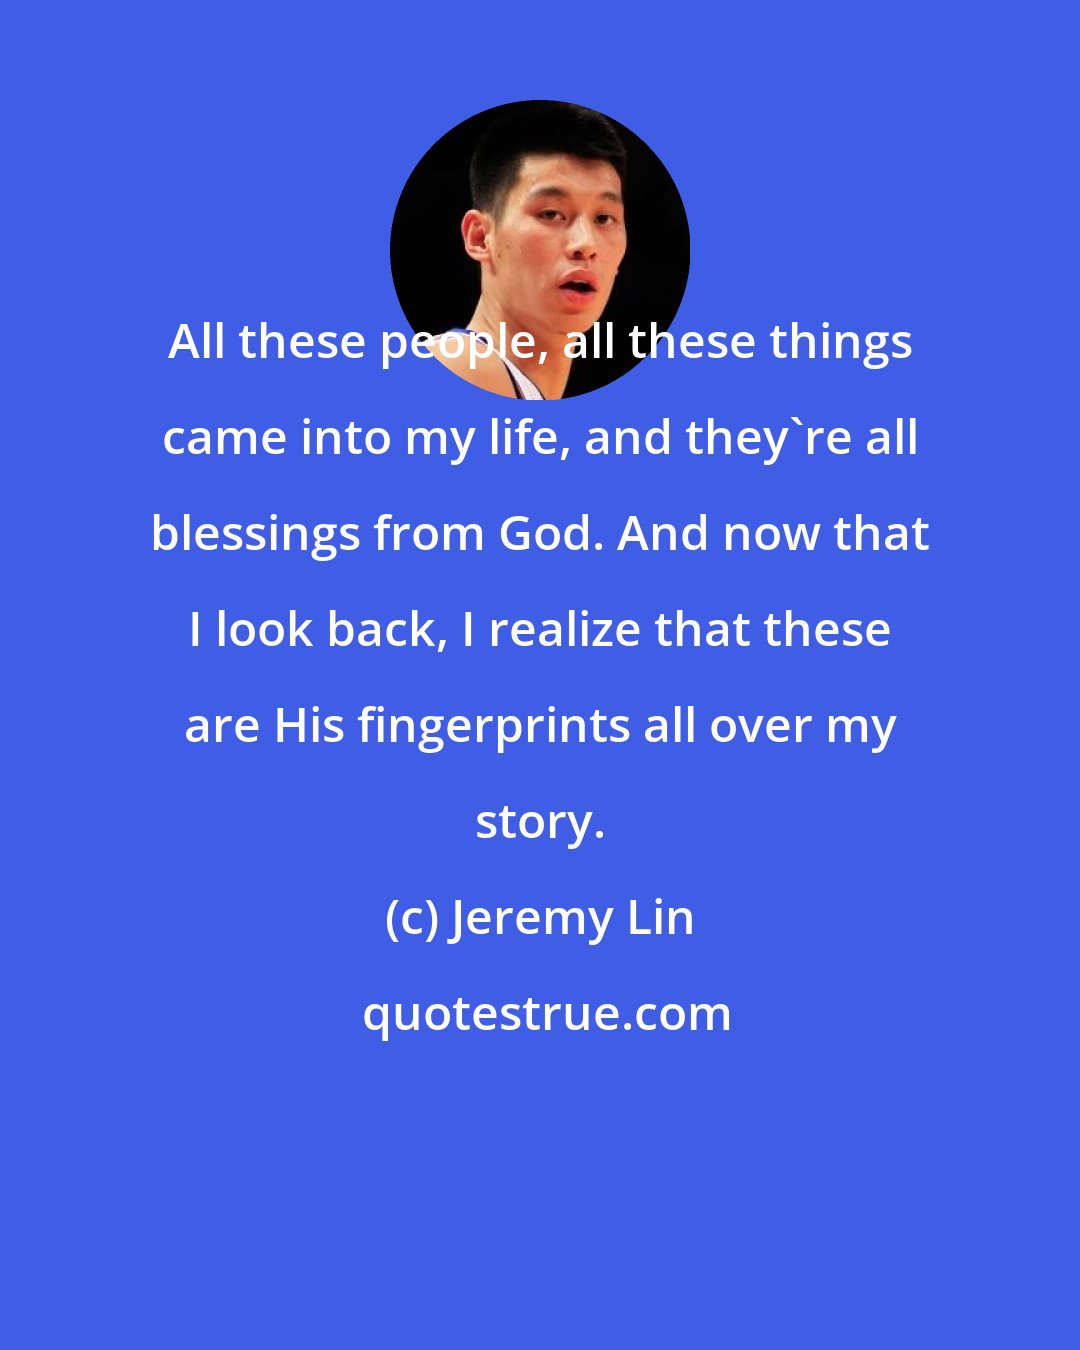 Jeremy Lin: All these people, all these things came into my life, and they're all blessings from God. And now that I look back, I realize that these are His fingerprints all over my story.